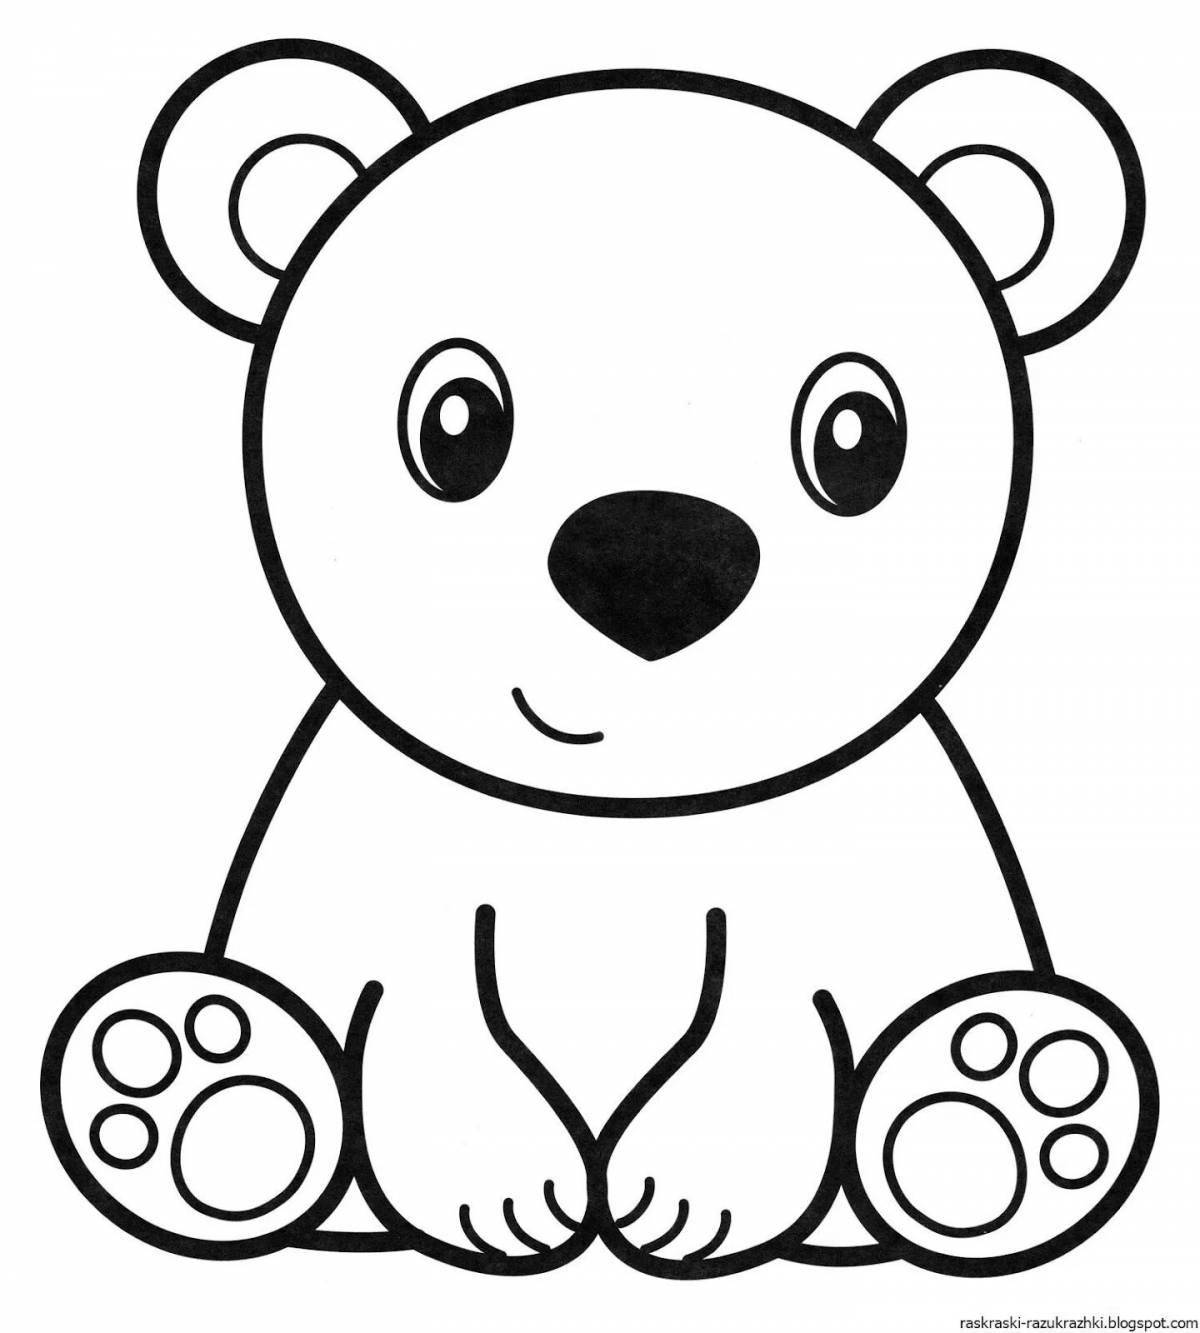 Coloring book funny bear for children 6-7 years old